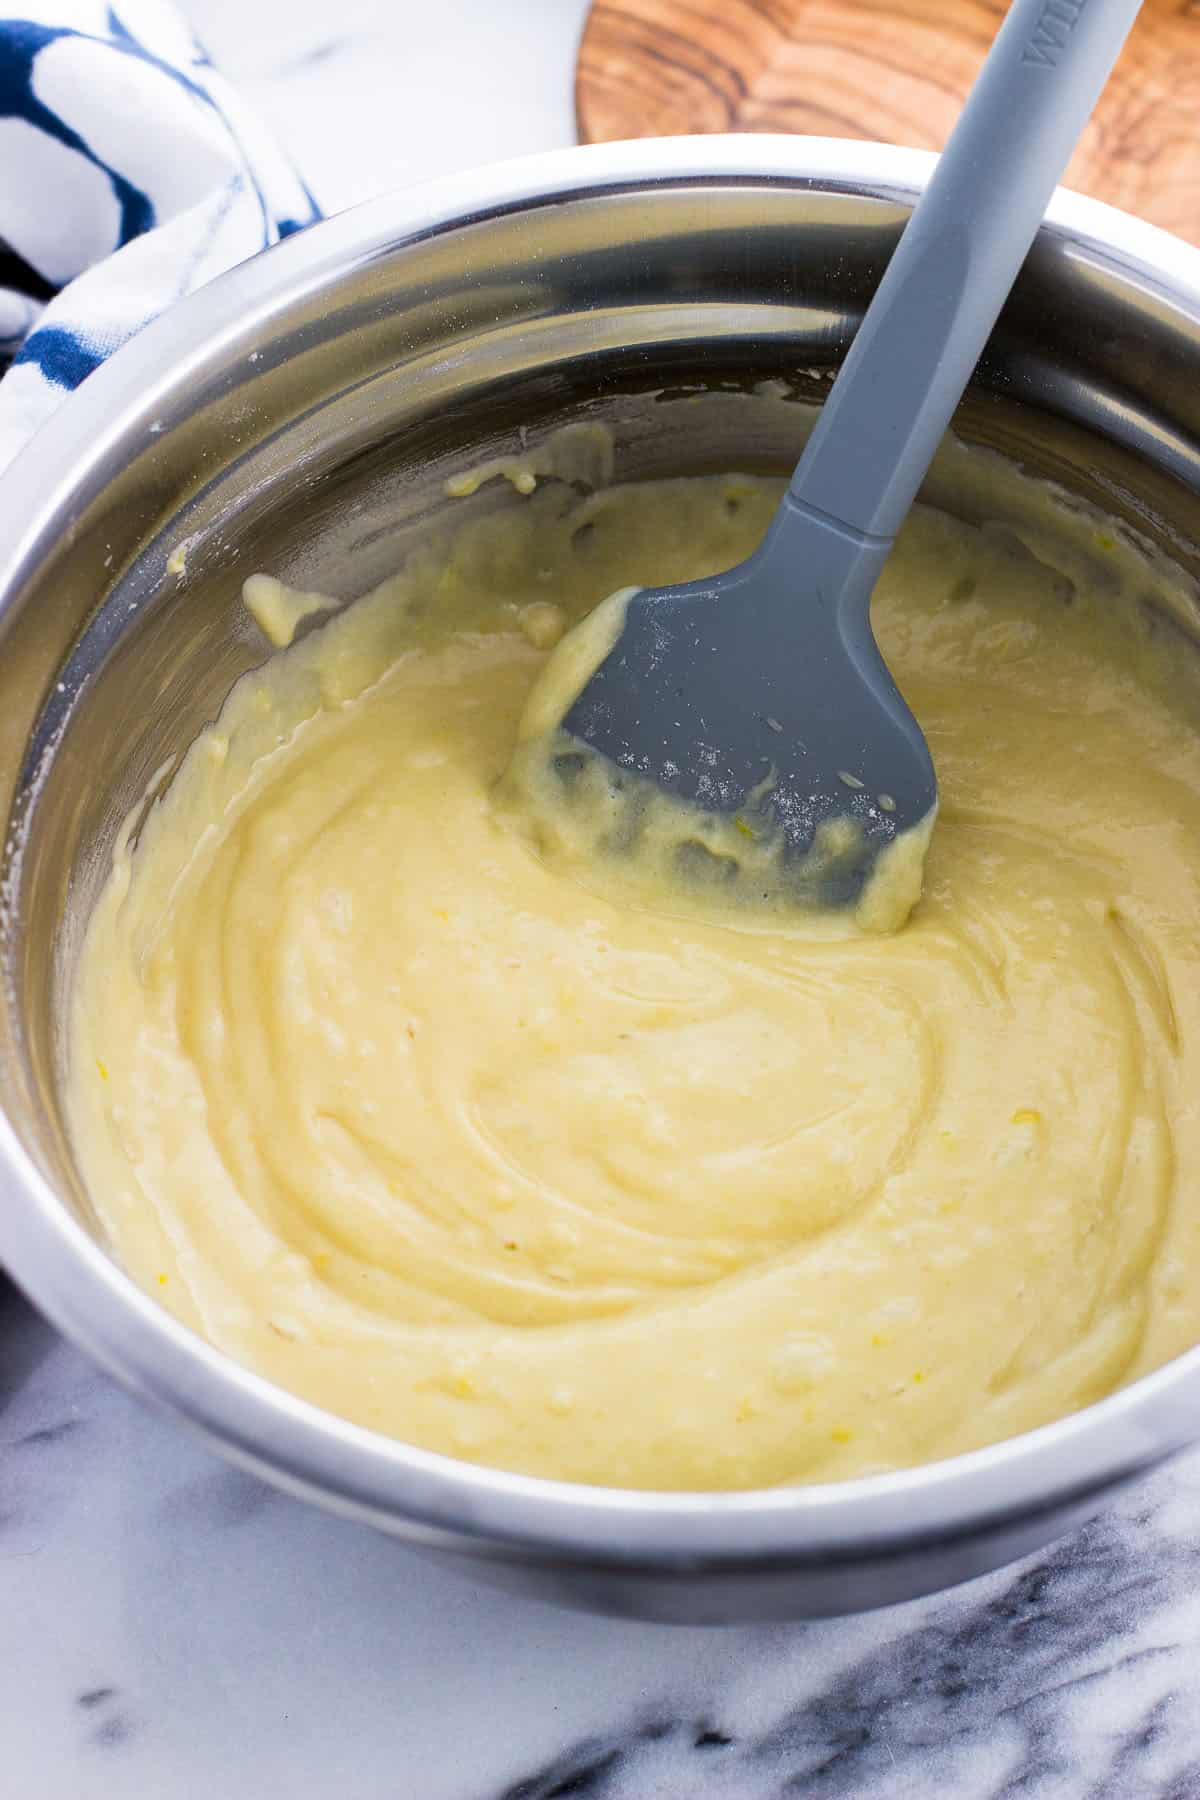 Cake batter in a metal mixing bowl with a spatula in it.